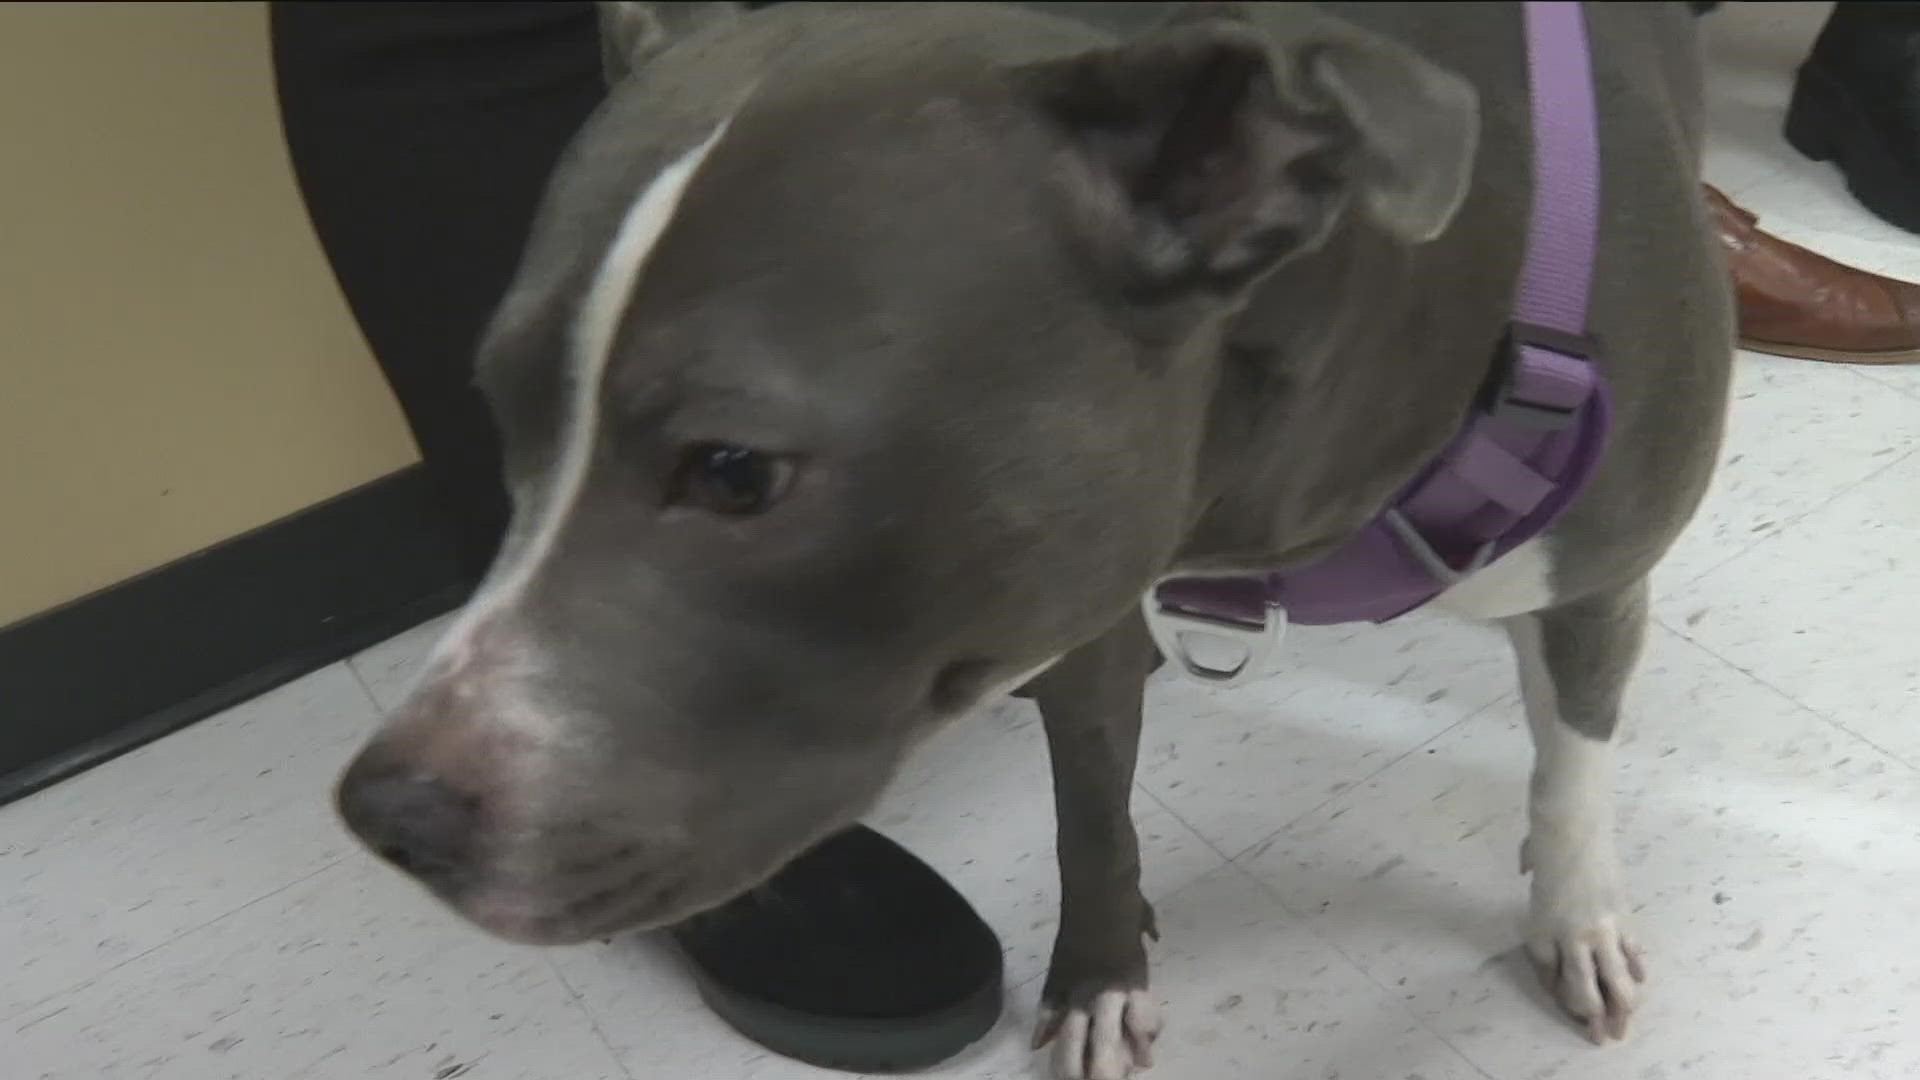 Firefighters ran in to save Knala's life after she was caught in a house fire. Her owners said she is still recovering.